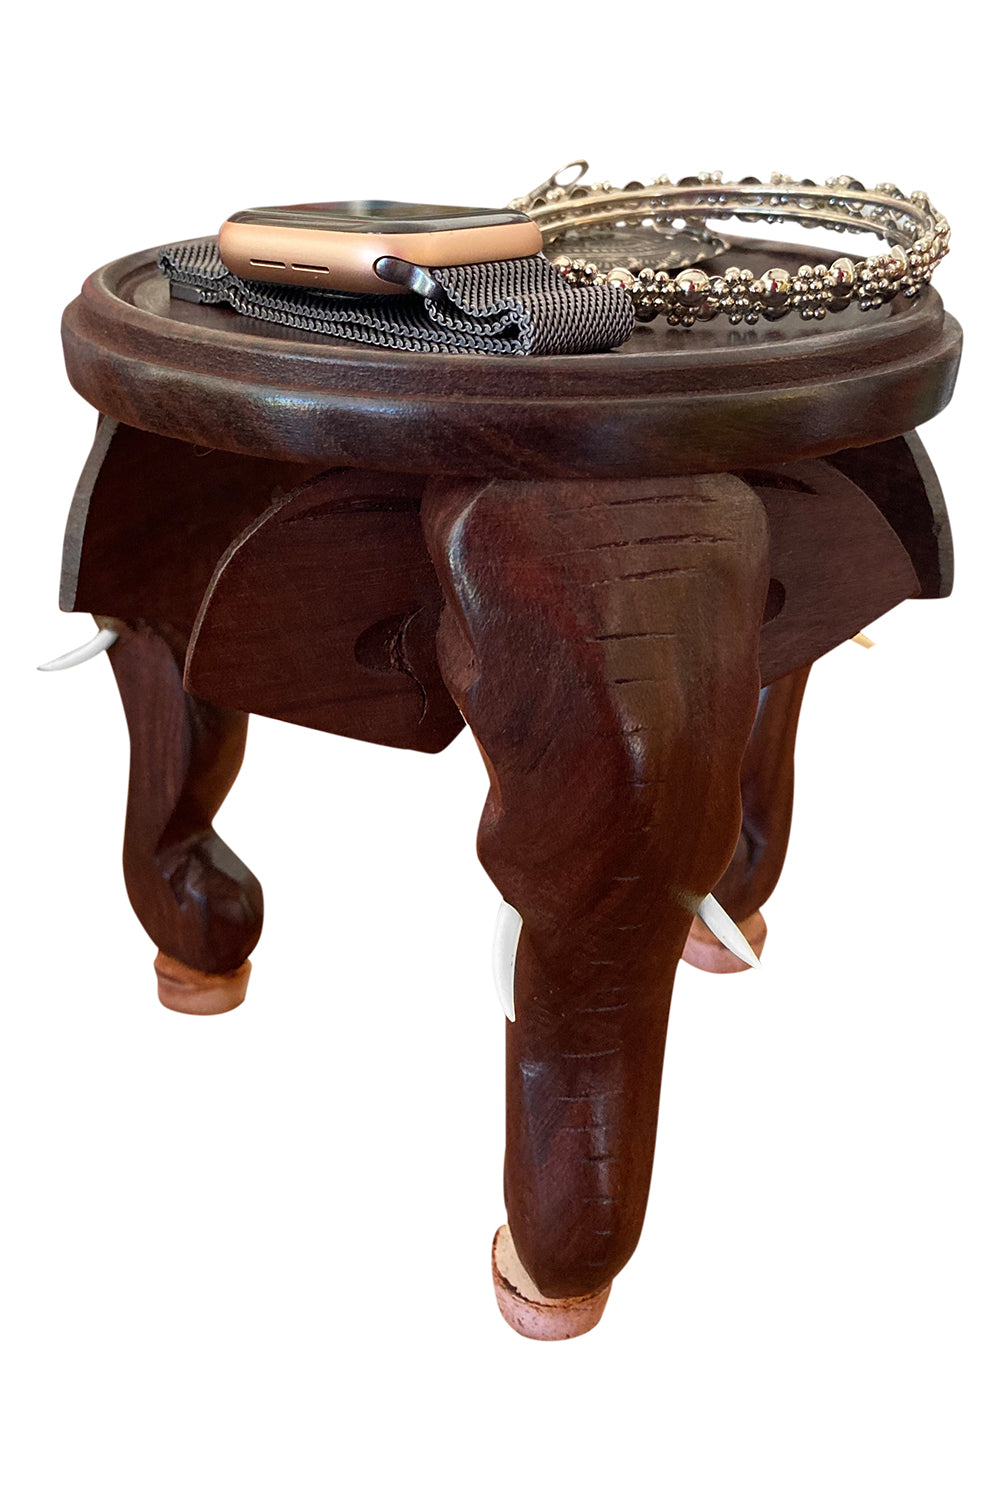 Southloom Handmade Elephant Head Flower Pot Stand Handicraft 8 Inches (Carved from Rose Wood)